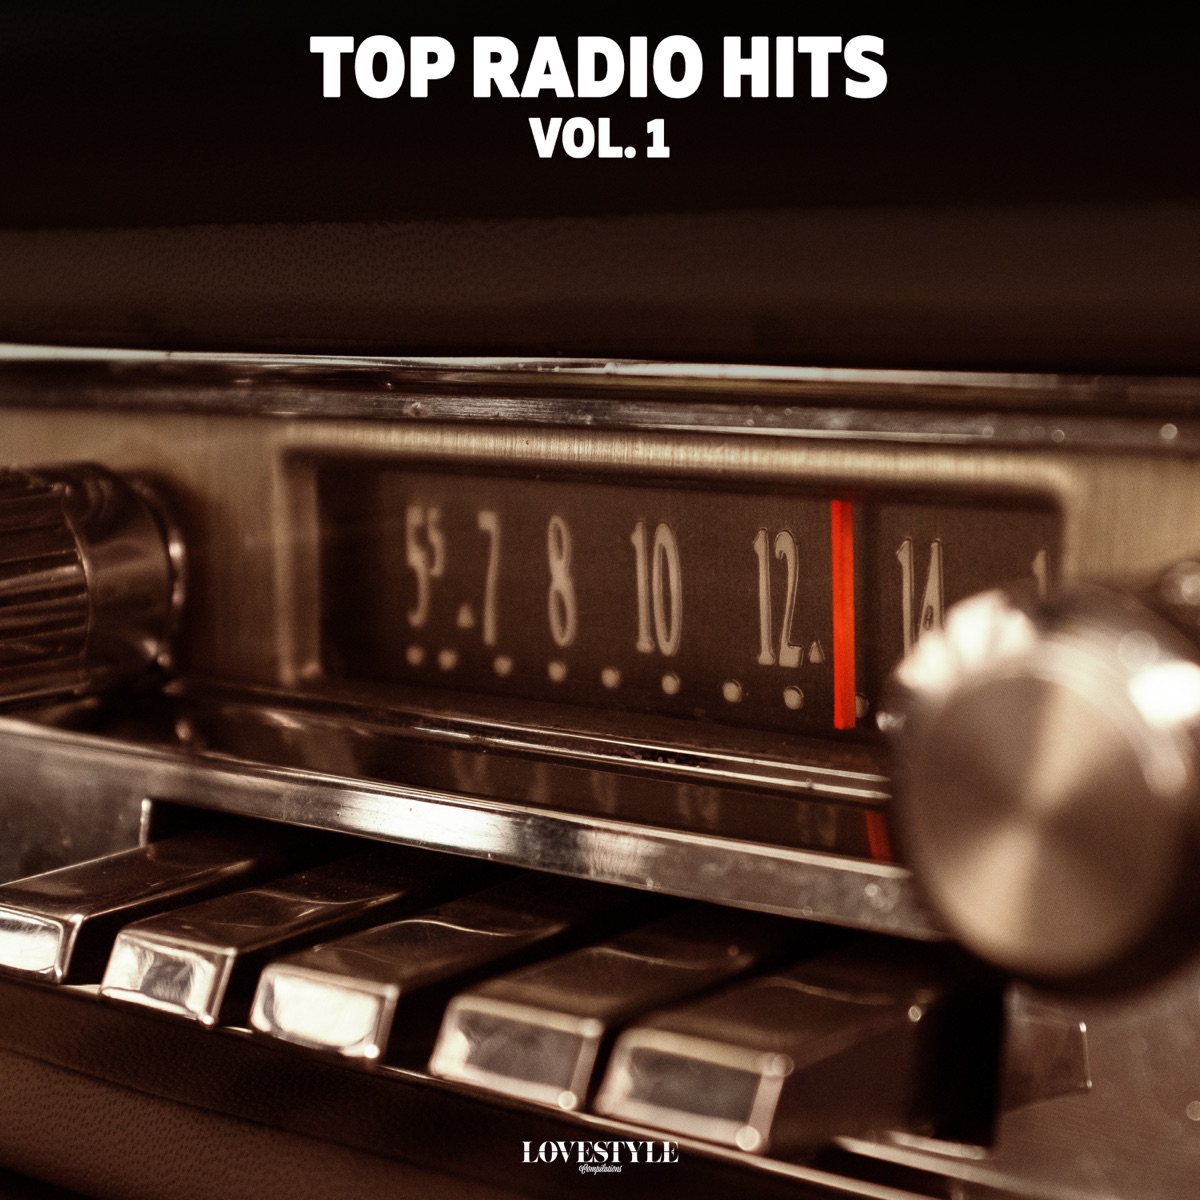 Top Radio Hits Vol. 1 by Various Artists on Apple Music